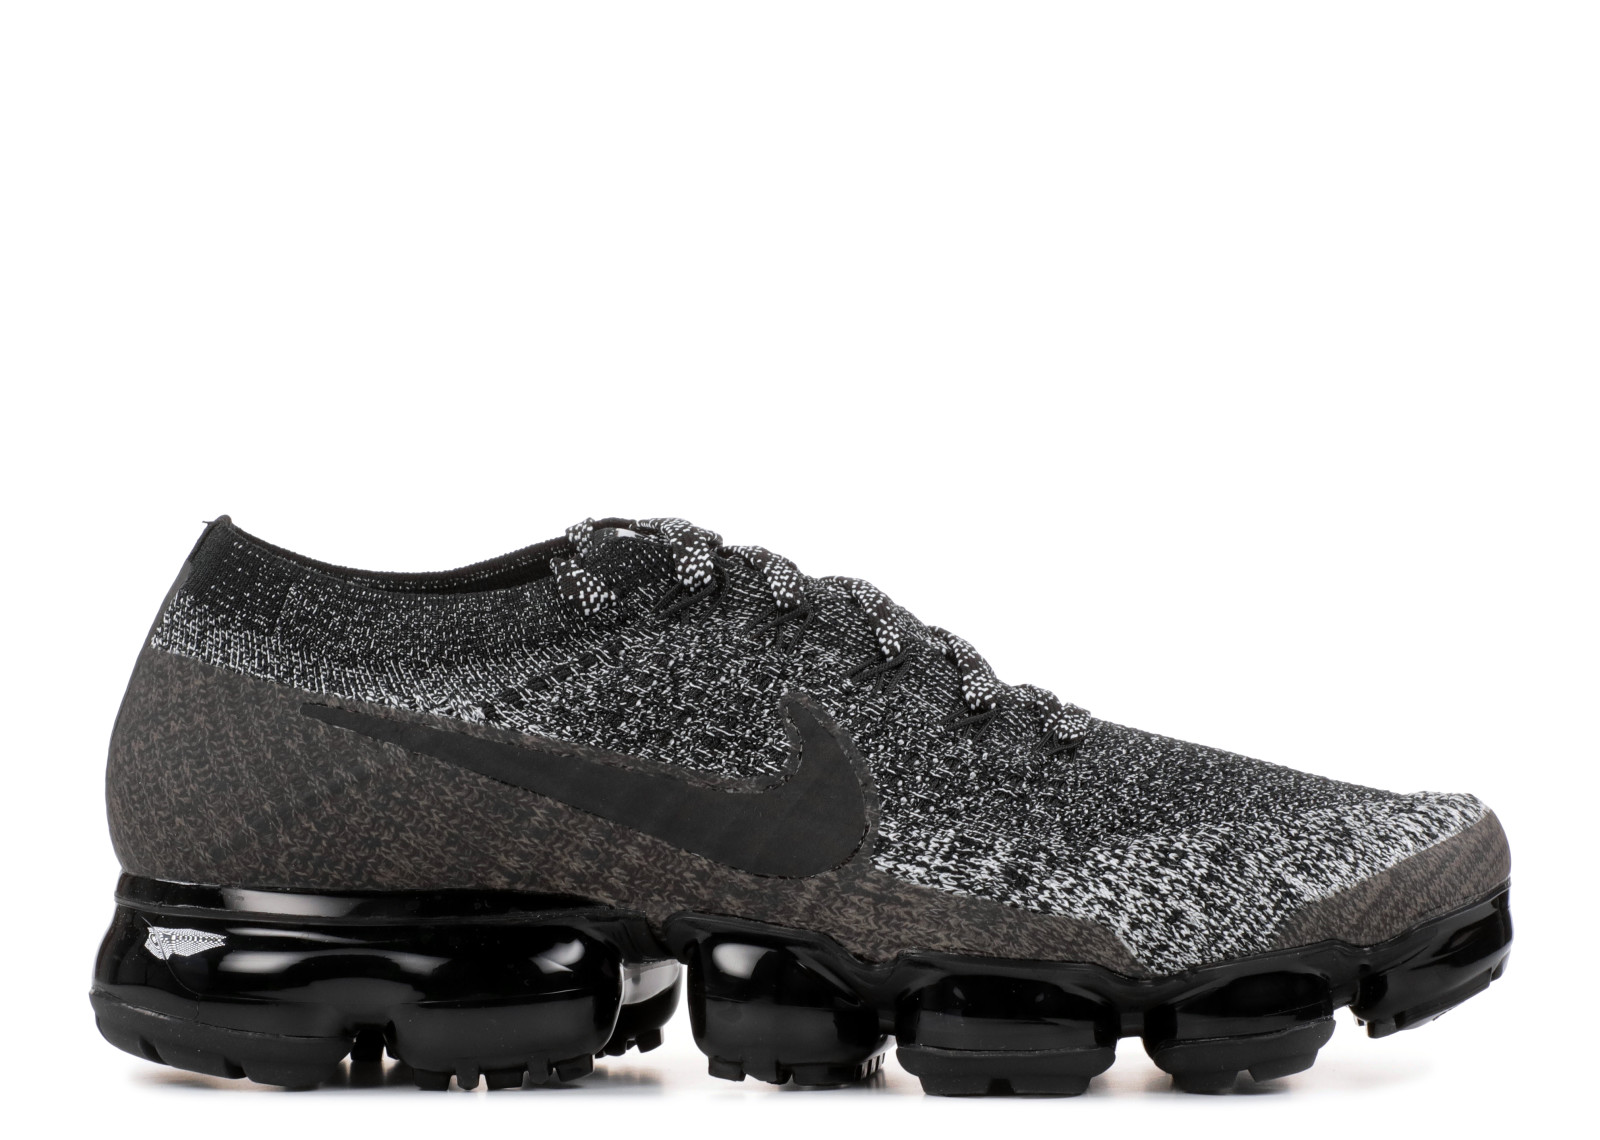 Womens Nike cheer Air Vapormax Flyknit Blue Black Racer 849557 - - nike cheer dunk purple yellow red and blue backgray - GmarShops